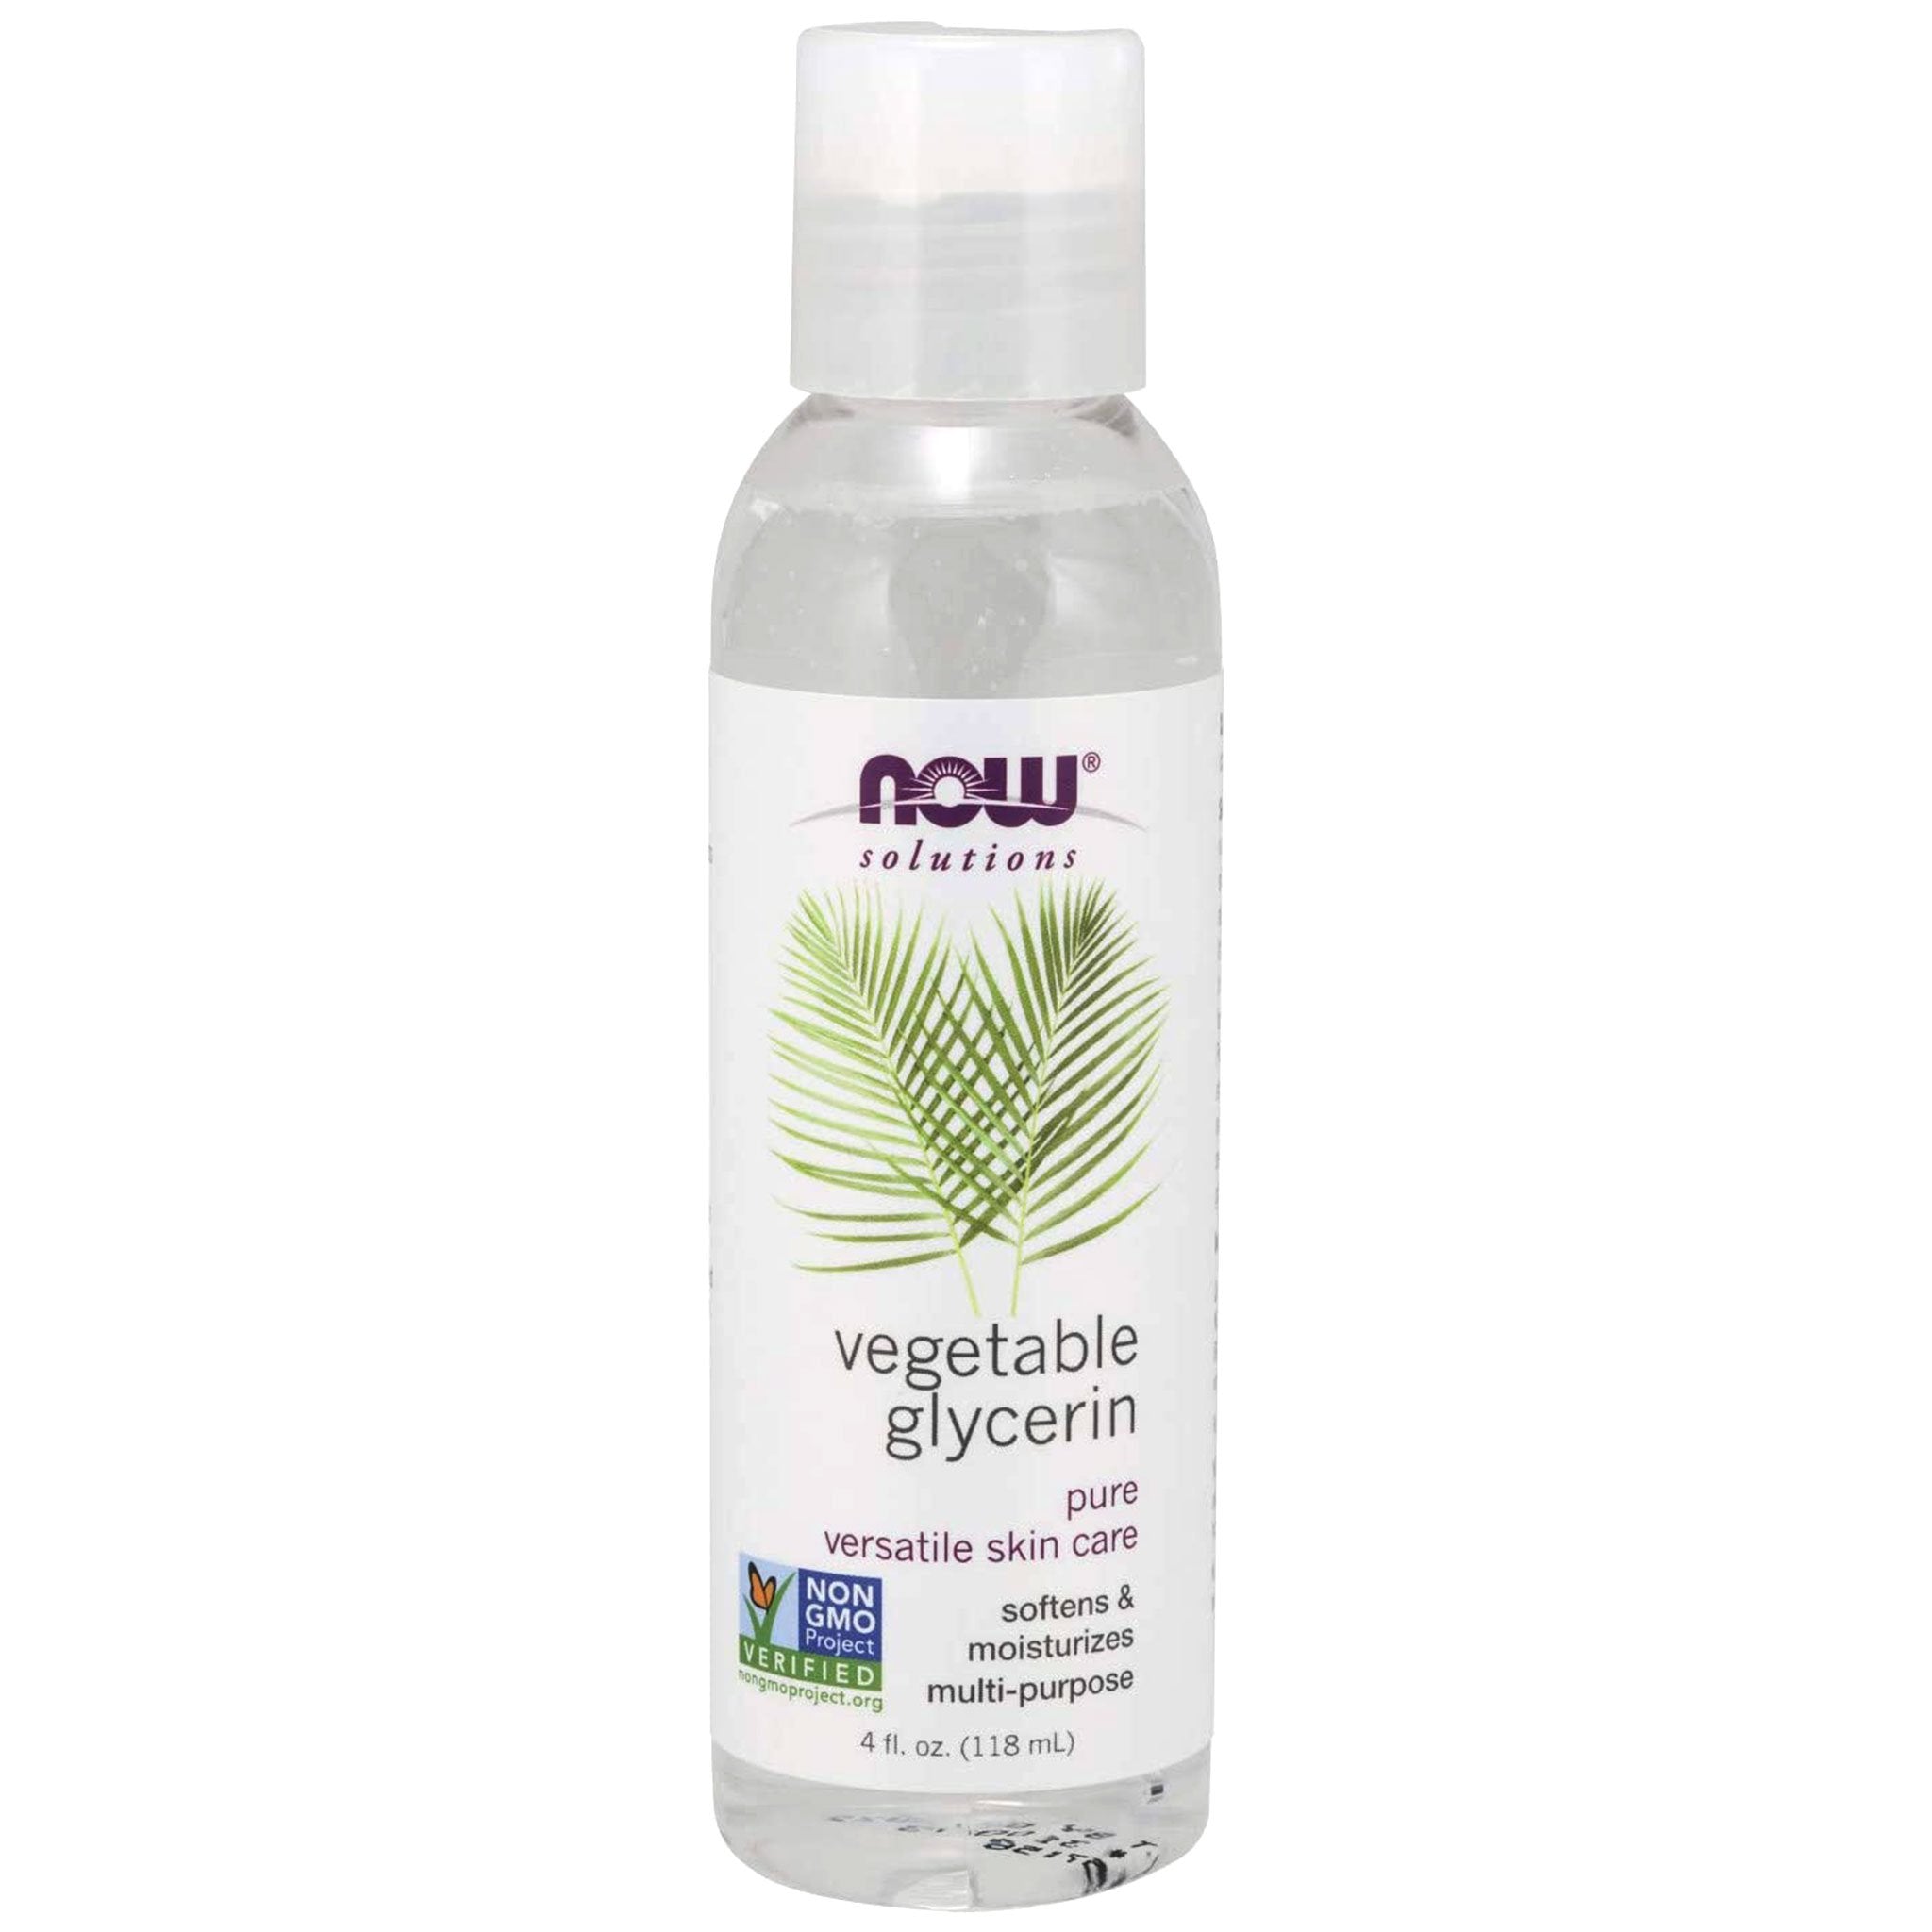 NOW Solutions Vegetable Glycerin Oil 118 ml Value Pack of 4 